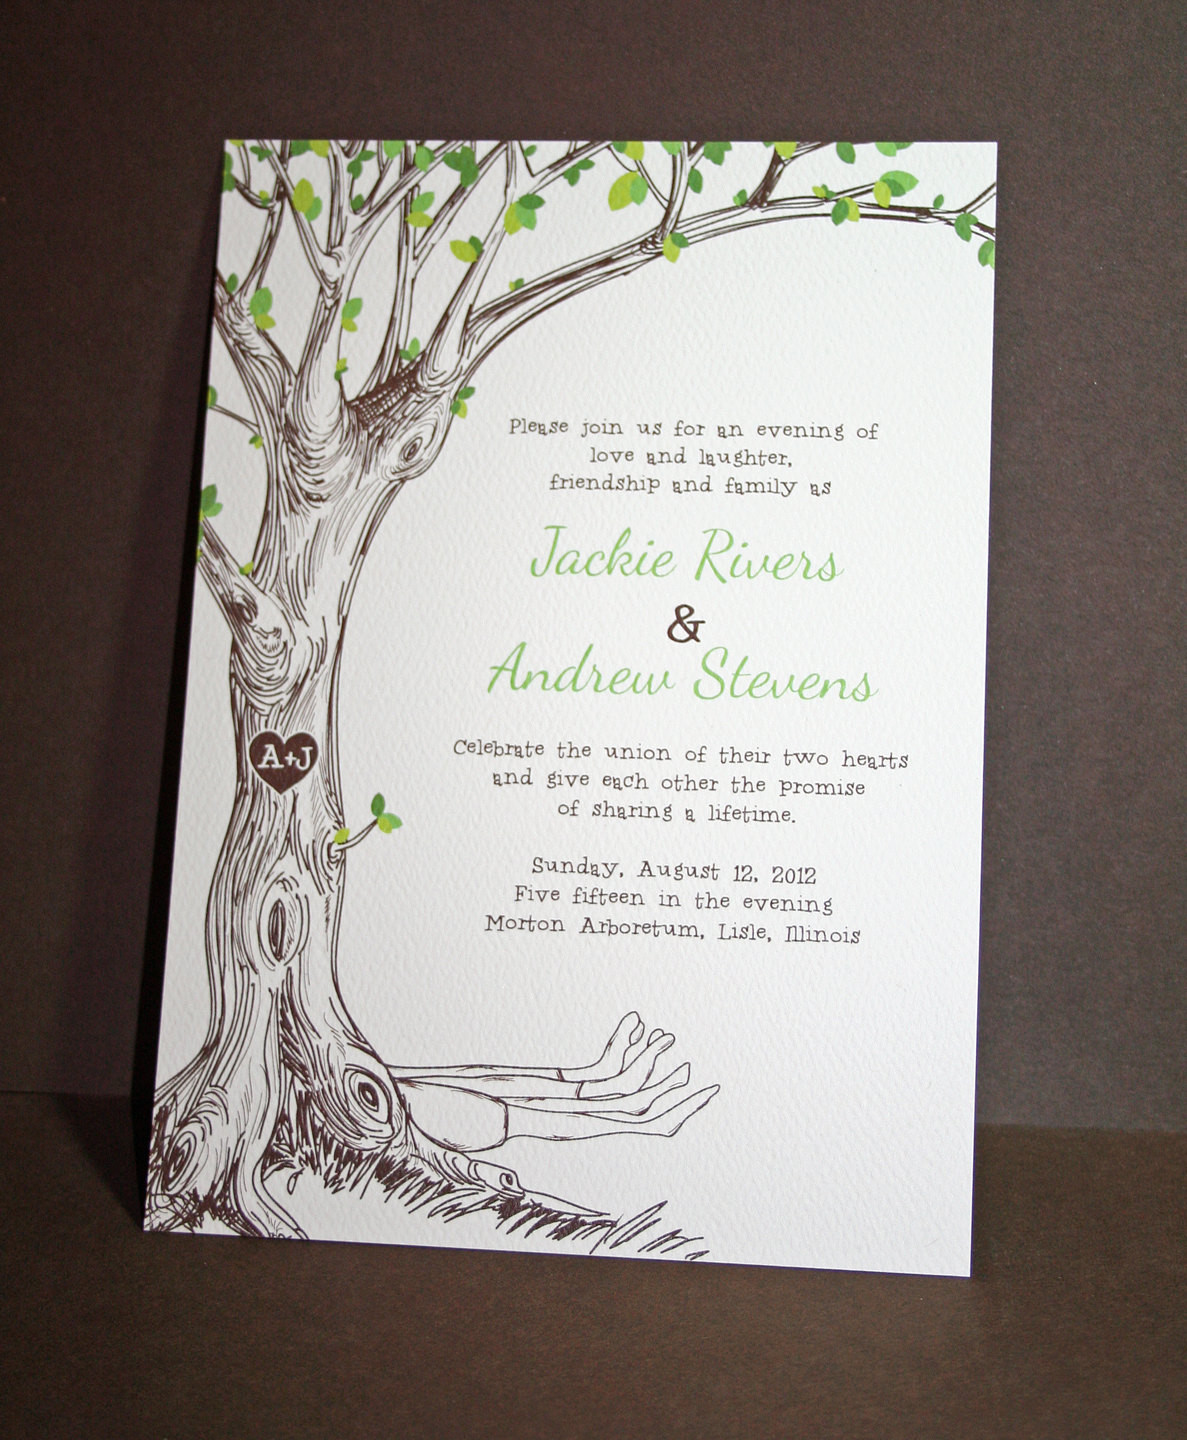 Wedding Invitations With Trees
 The Giving Tree Wedding Invitations Sample by